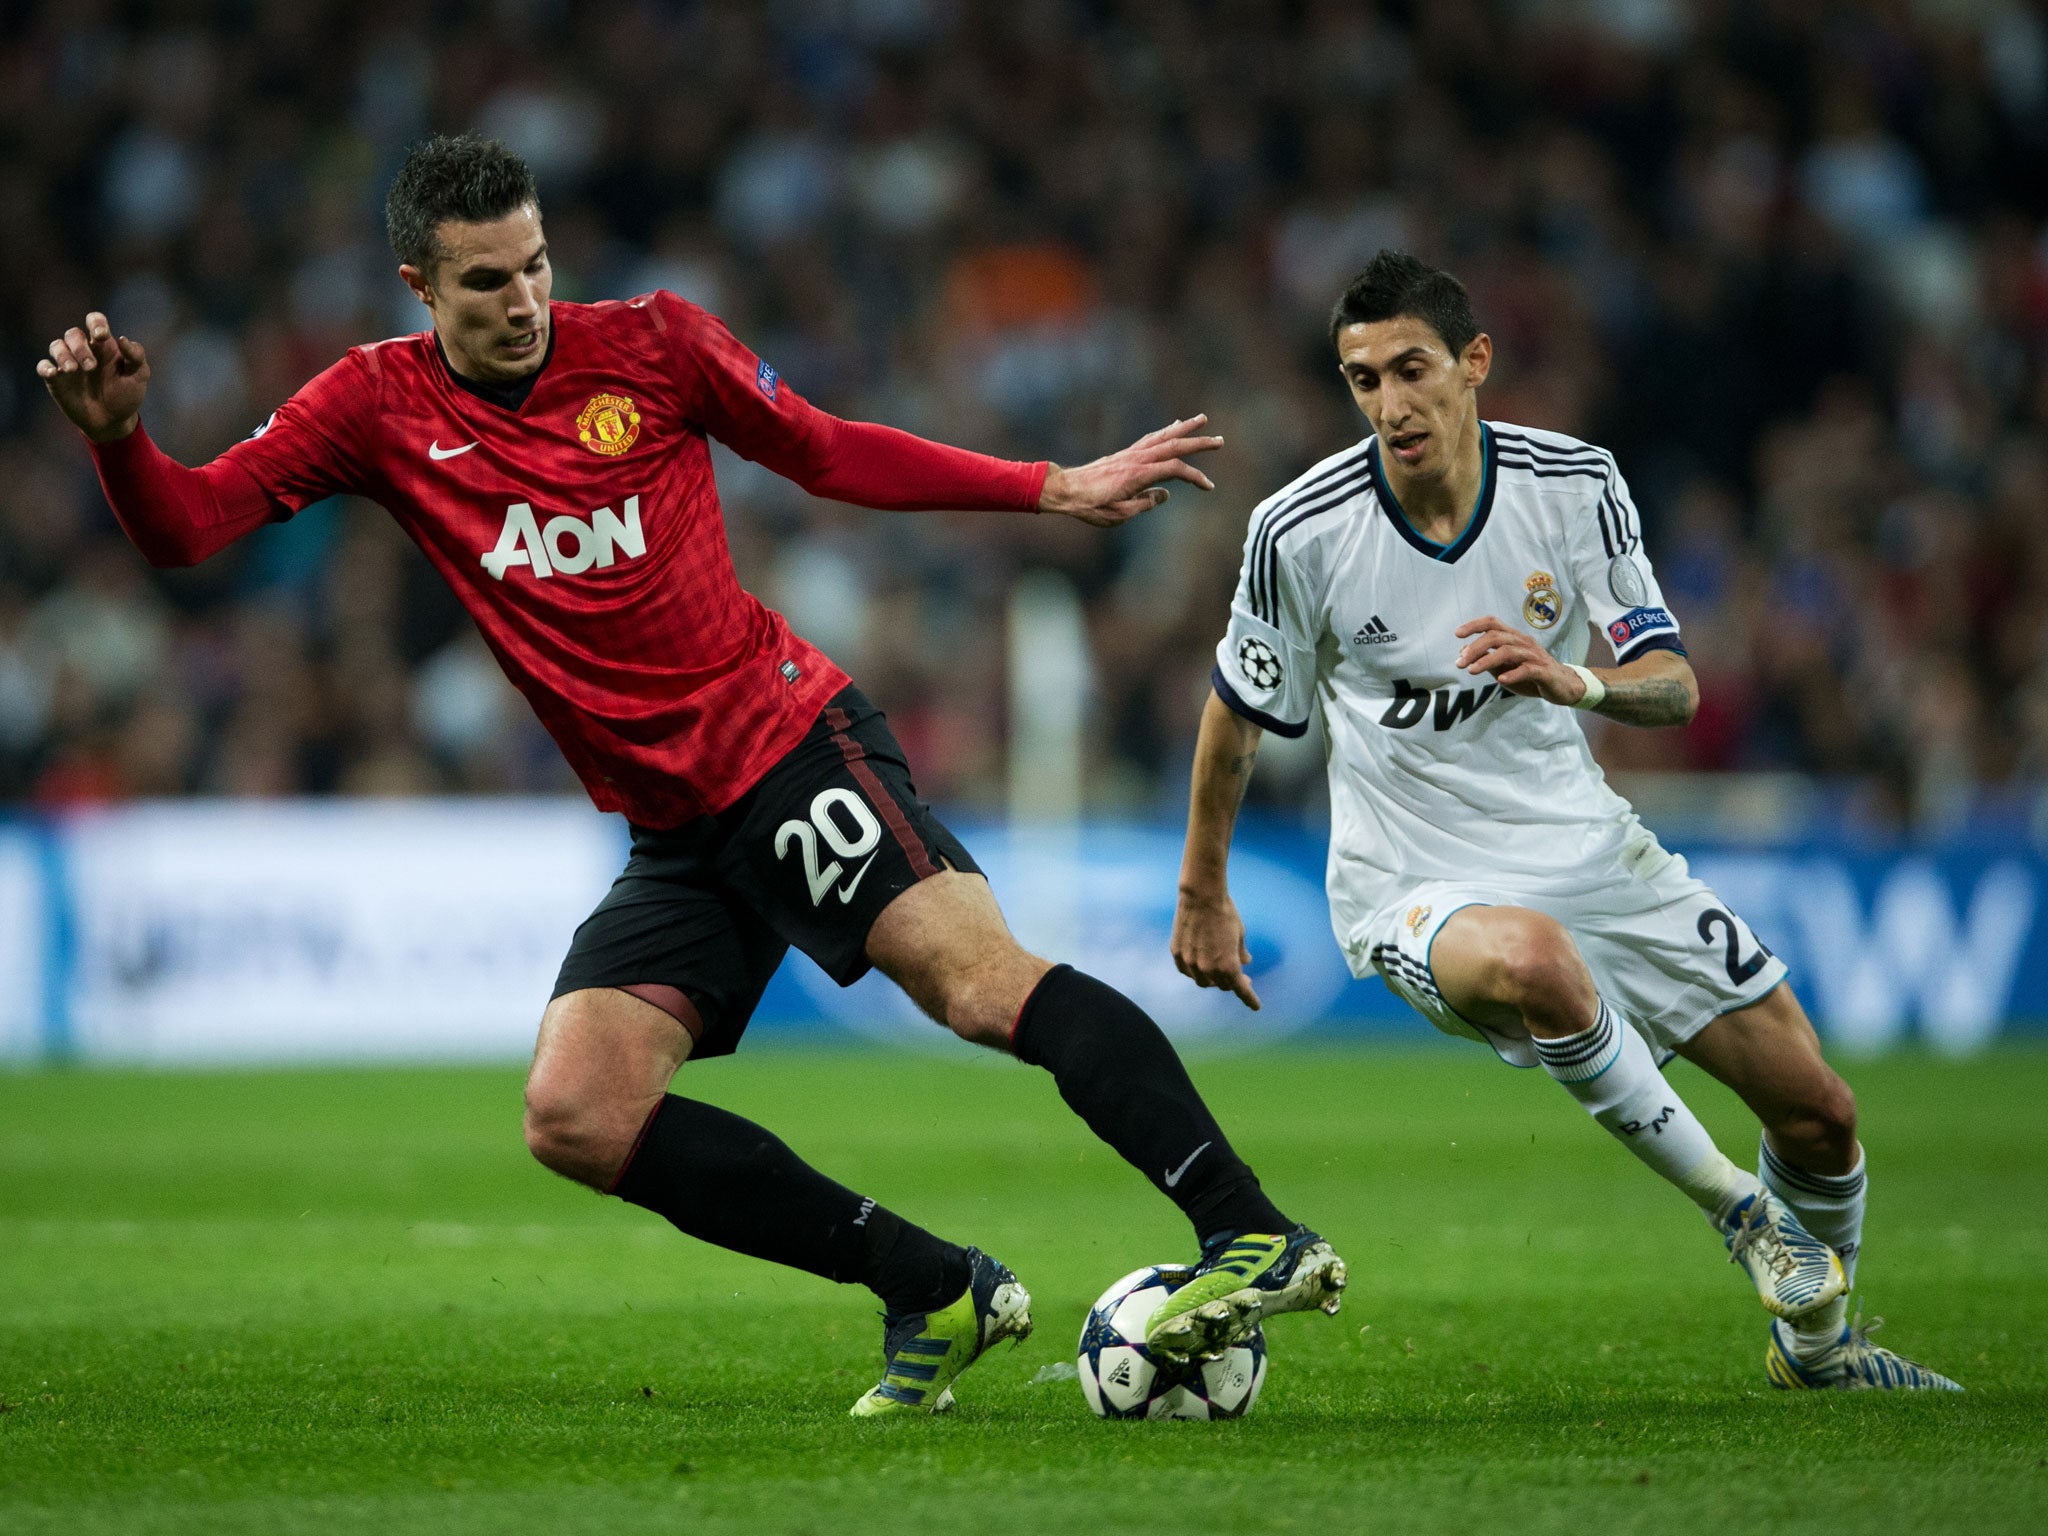 Robin van Persie of Manchester United clashes with Angel Di Maria of Real Madrid